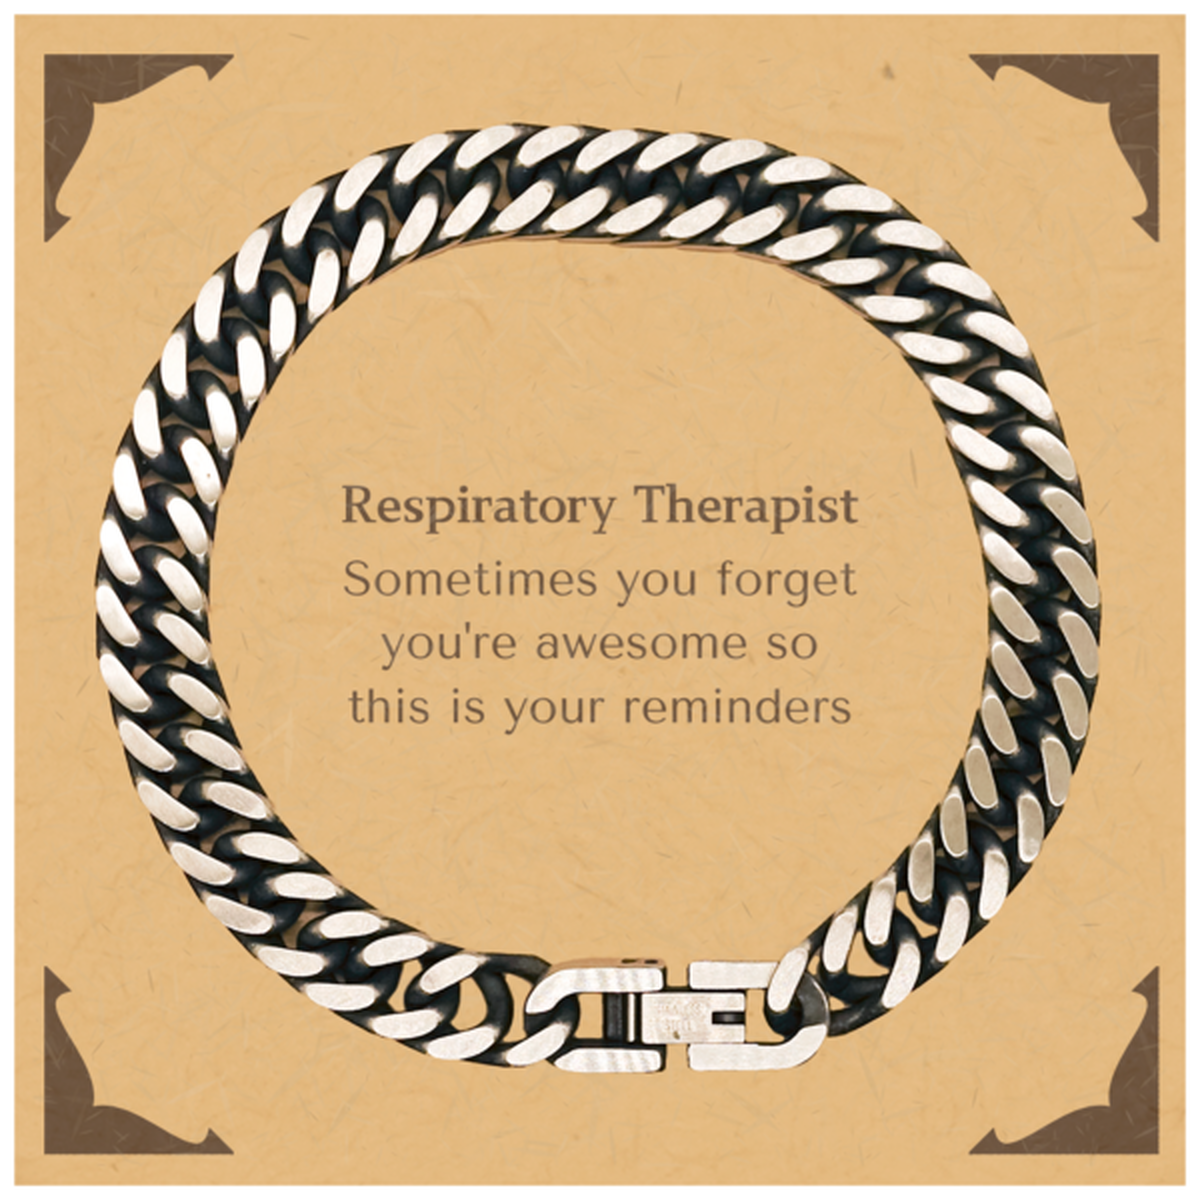 Sentimental Respiratory Therapist Cuban Link Chain Bracelet, Respiratory Therapist Sometimes you forget you're awesome so this is your reminders, Graduation Christmas Birthday Gifts for Respiratory Therapist, Men, Women, Coworkers